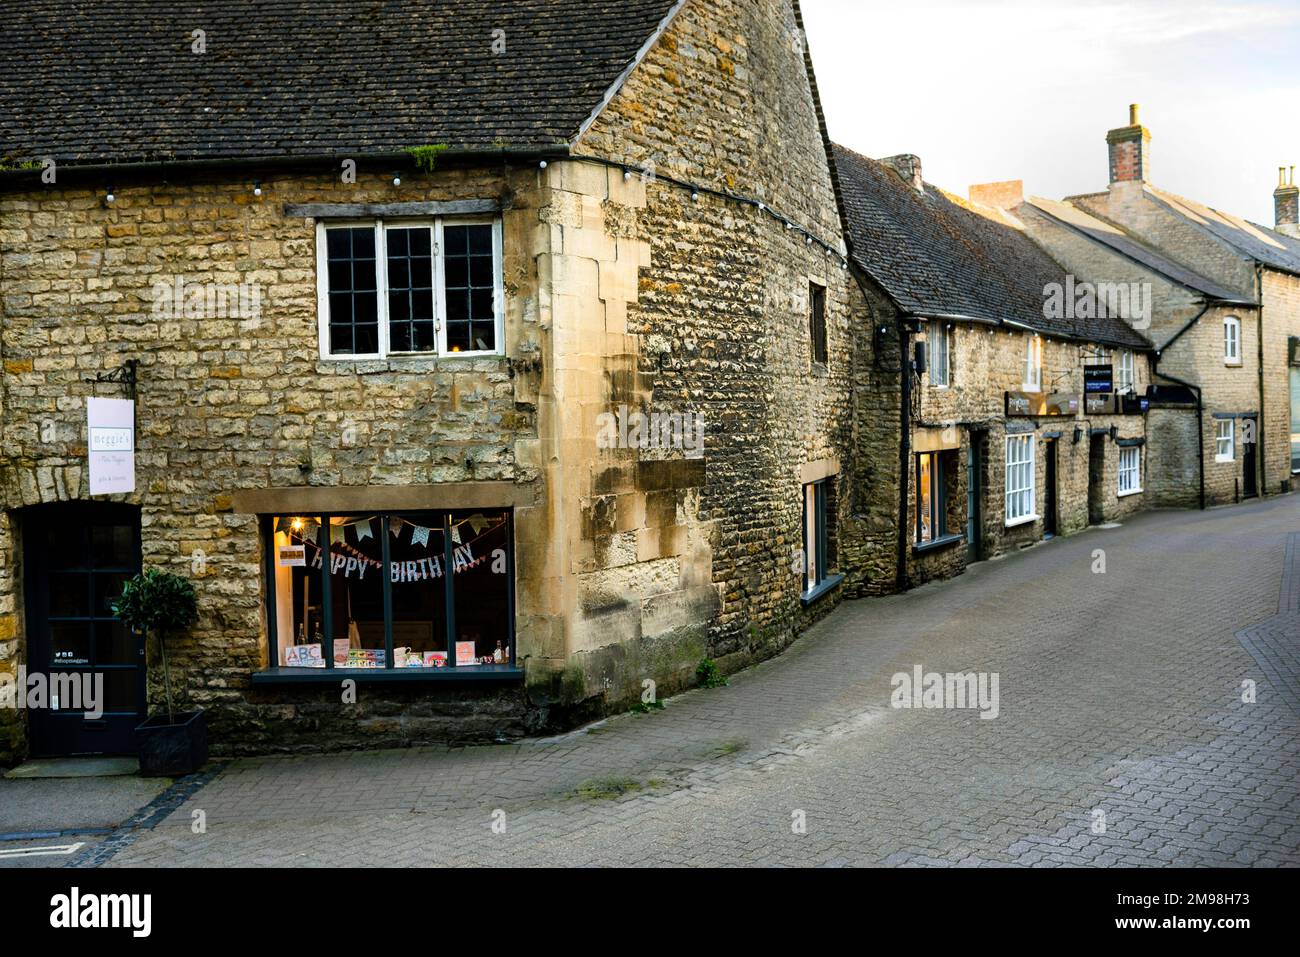 The Old Forge building in quintessential Cotswolds, Stow-on-the-Wold, England. Stock Photo